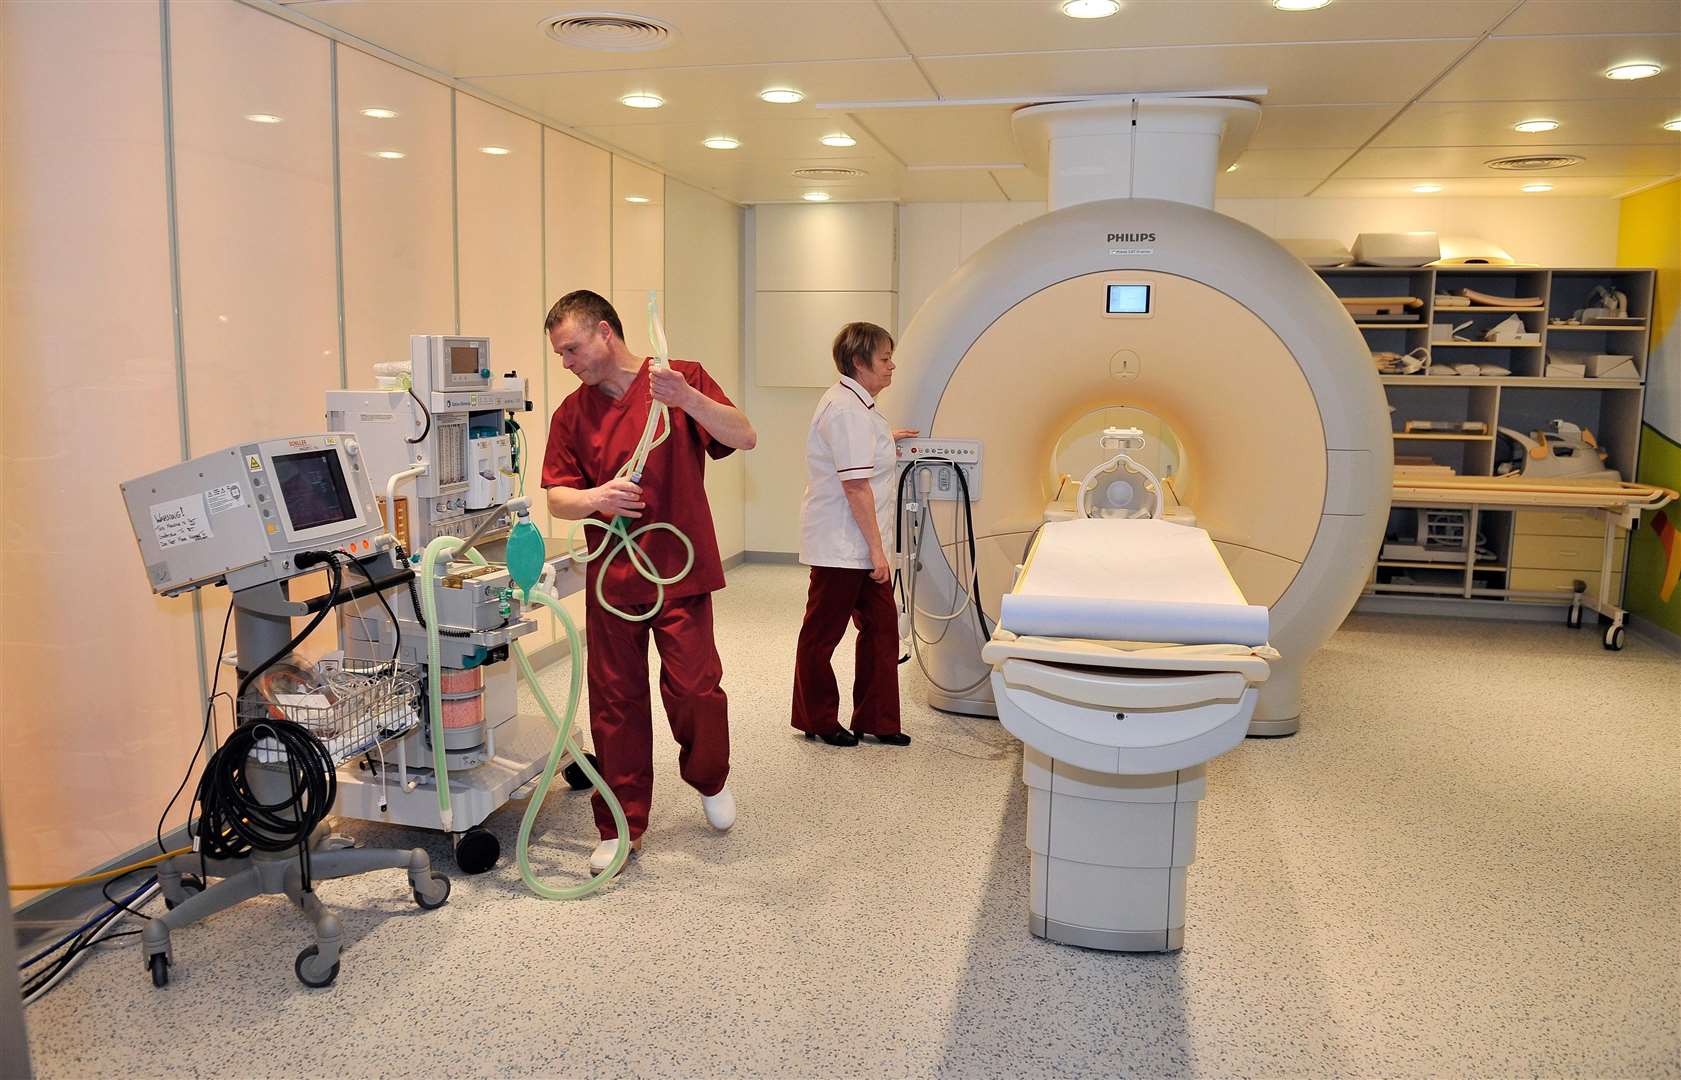 More than 100 MRI scanners will be upgraded with AI software to improve scan times, under Treasury plans (Bruce Adams/Daily Mail)